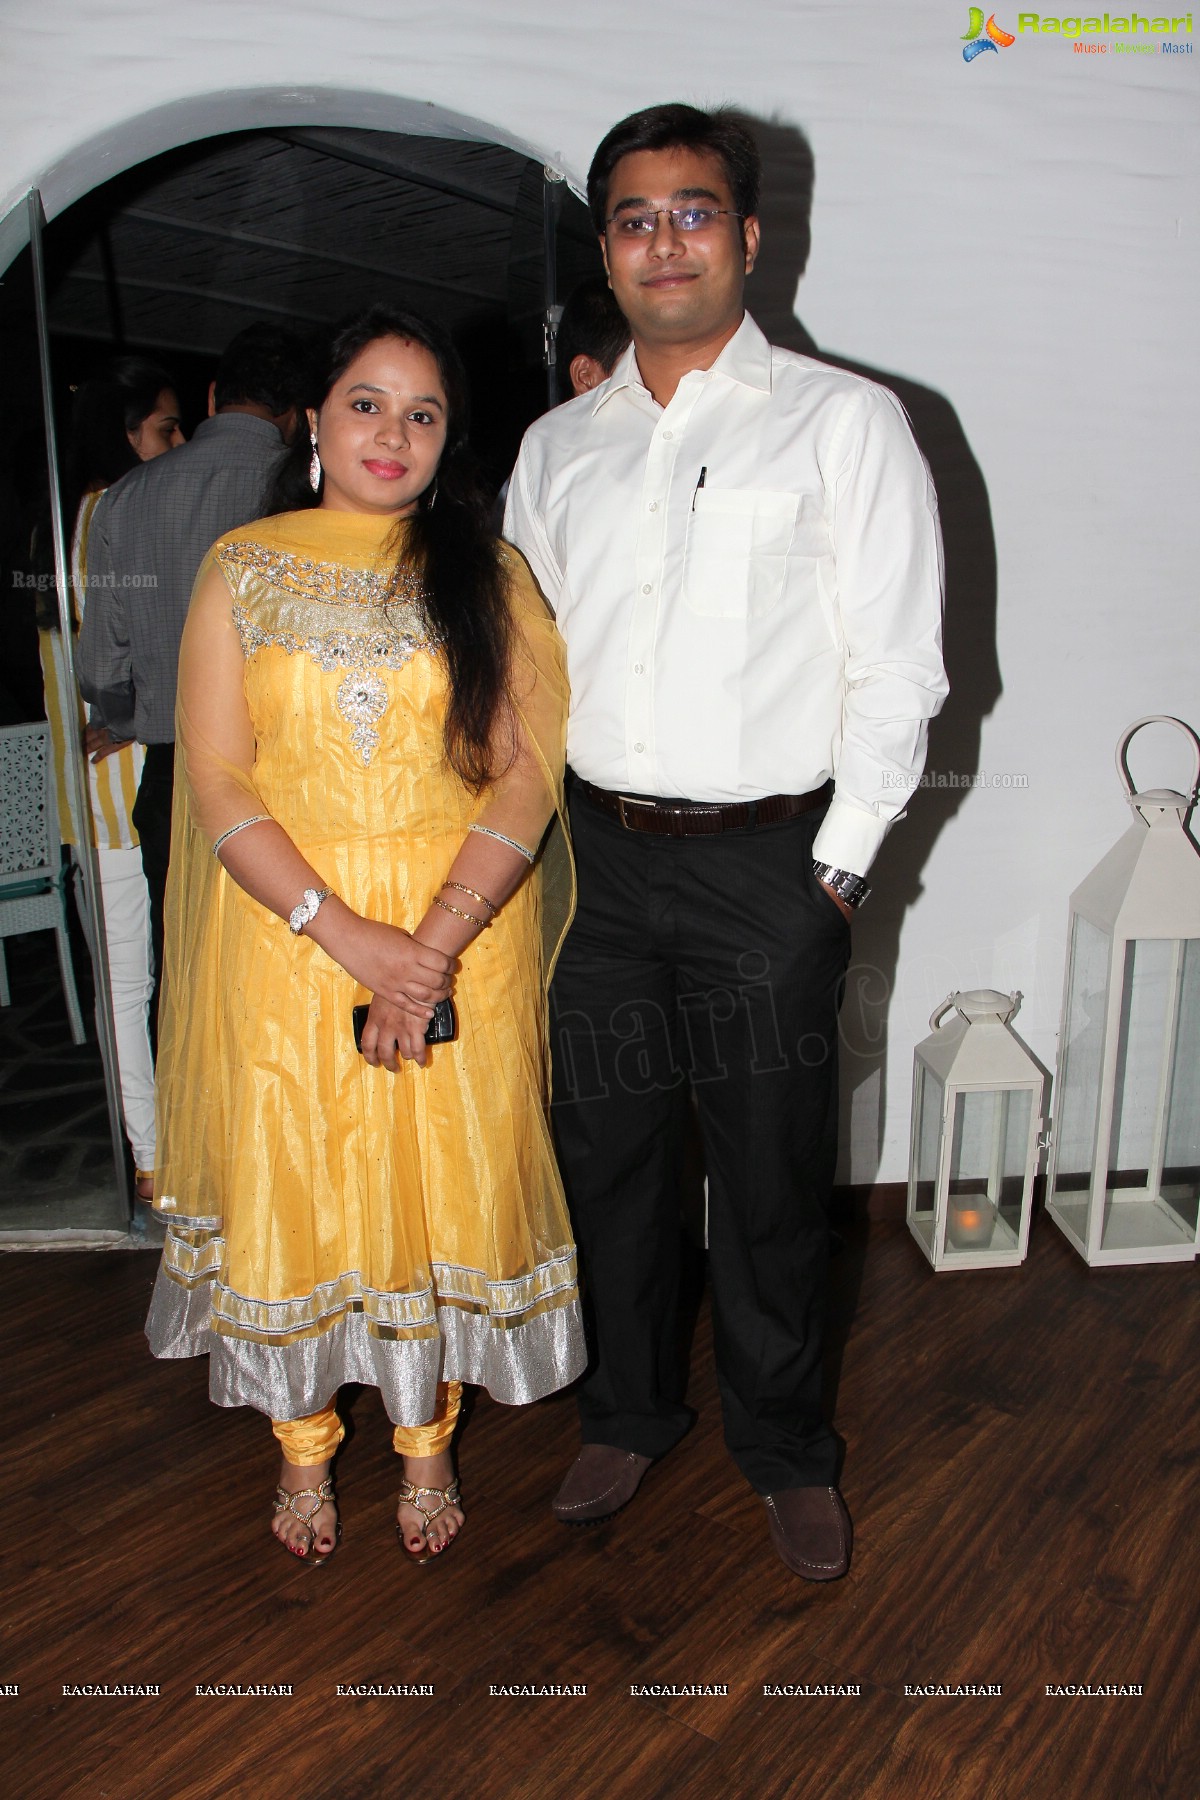 Dr. Nandakishore's Dinner Party at The Bludoor, Hyderabad